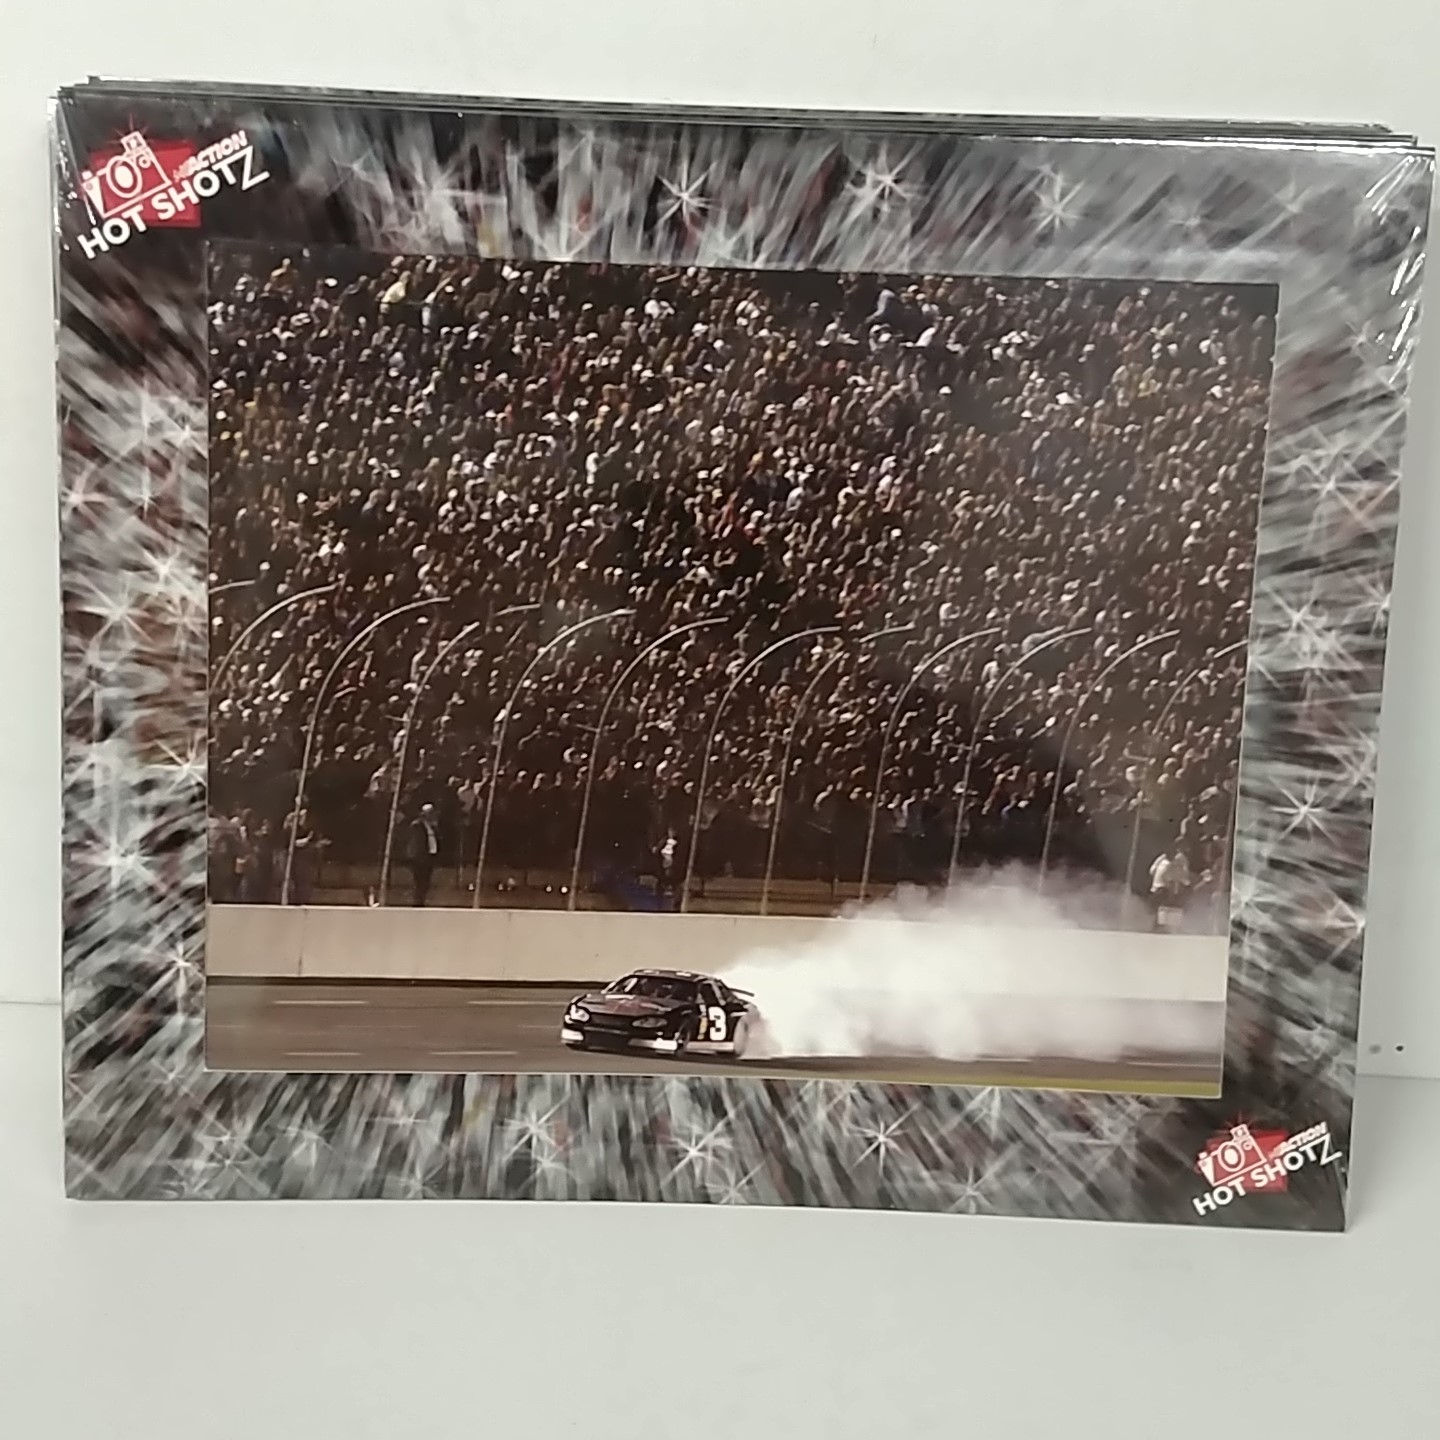 2003 Dale Earnhardt GM Goodwrench "Victory Lap" Hot Shotz Photo